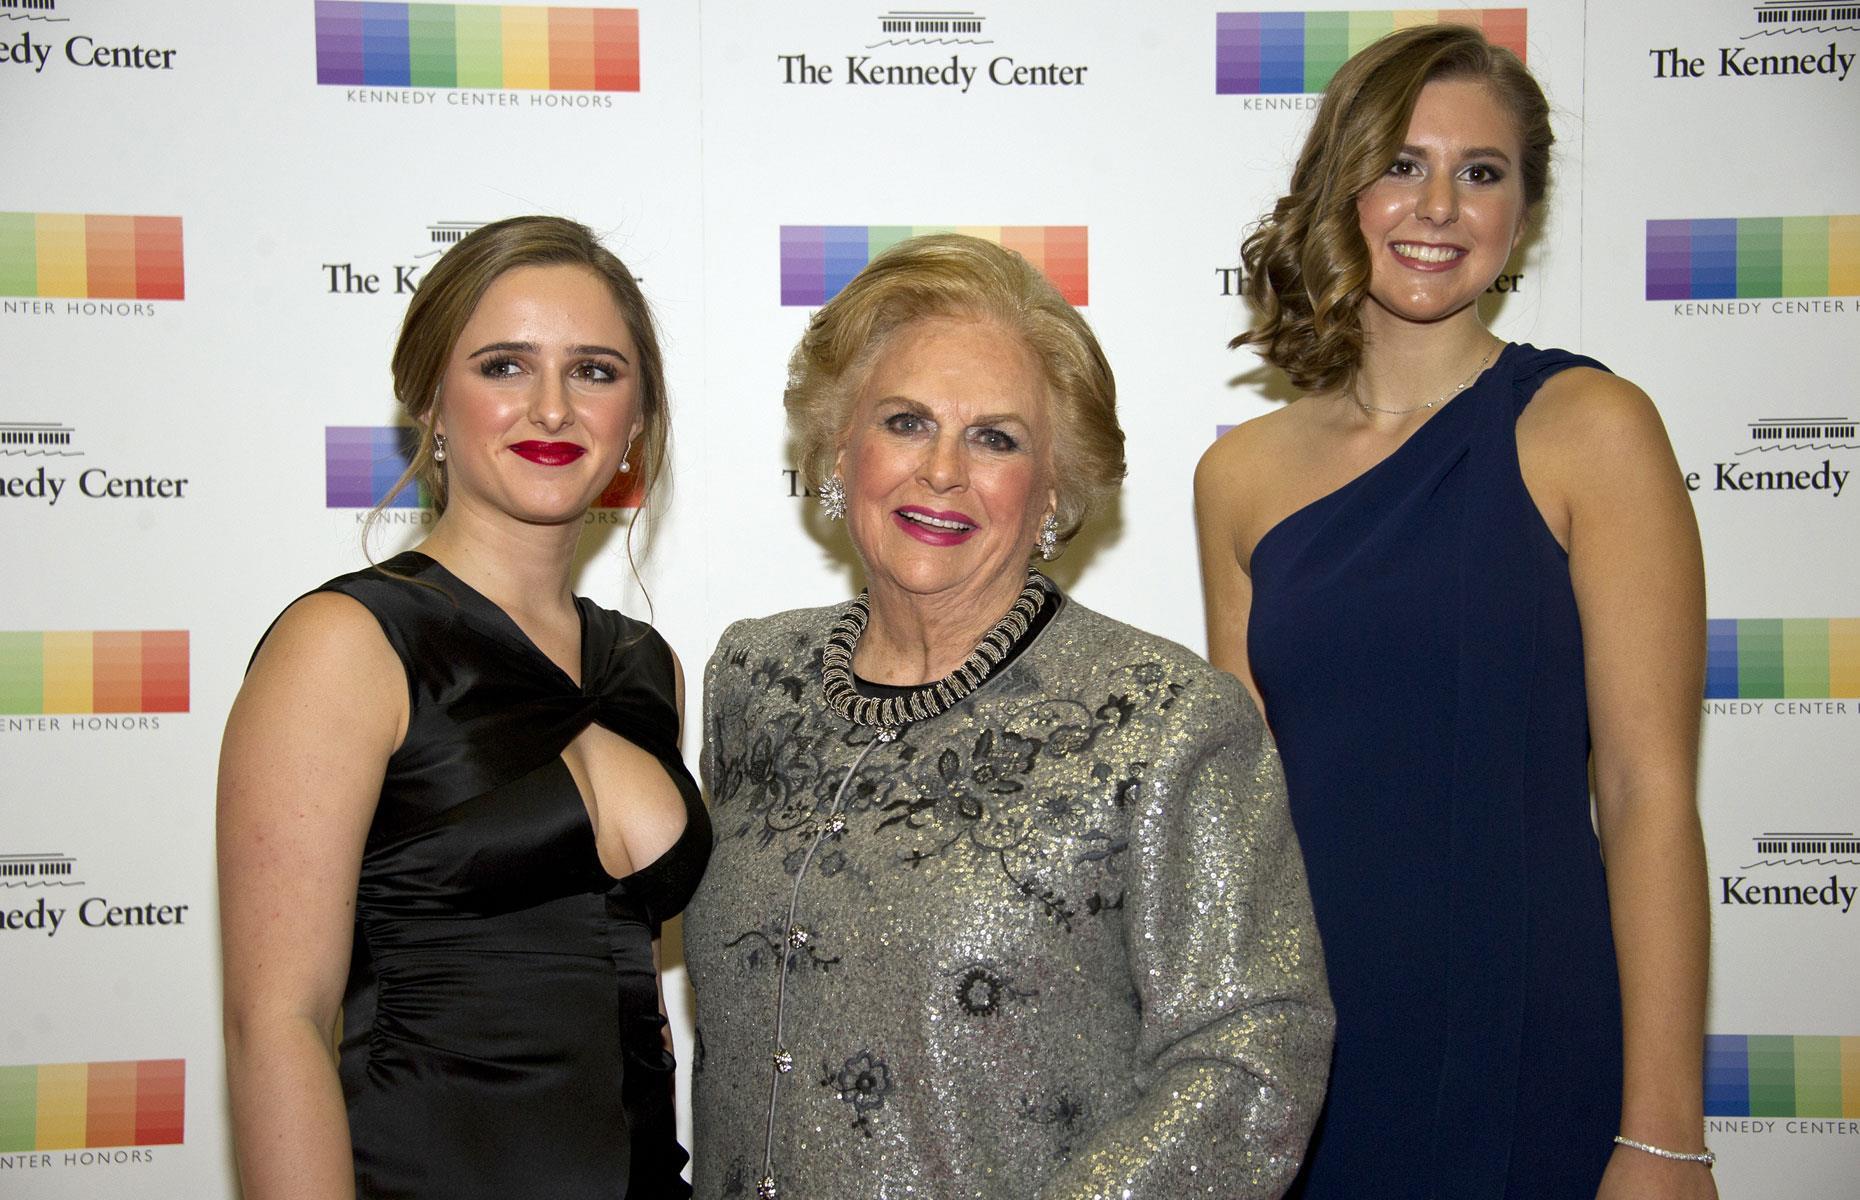 <p>When Forrest Mars Sr. died in 1991, the confectionery tycoon bequeathed Mars, Inc., the candy and pet foods empire his father founded in 1911, to his three children Jacqueline (pictured here with her granddaughters Graysen Airth and Katherine Burgstahler), Forrest Mars Jr. and John Mars.</p>  <p>The Mars siblings have complete control over the company, which has a plethora of popular brands, from Snickers and M&Ms to Whiskas and Dolmio.</p>  <p>The clan are worth a staggering $94 billion according to the most recent estimates.</p>